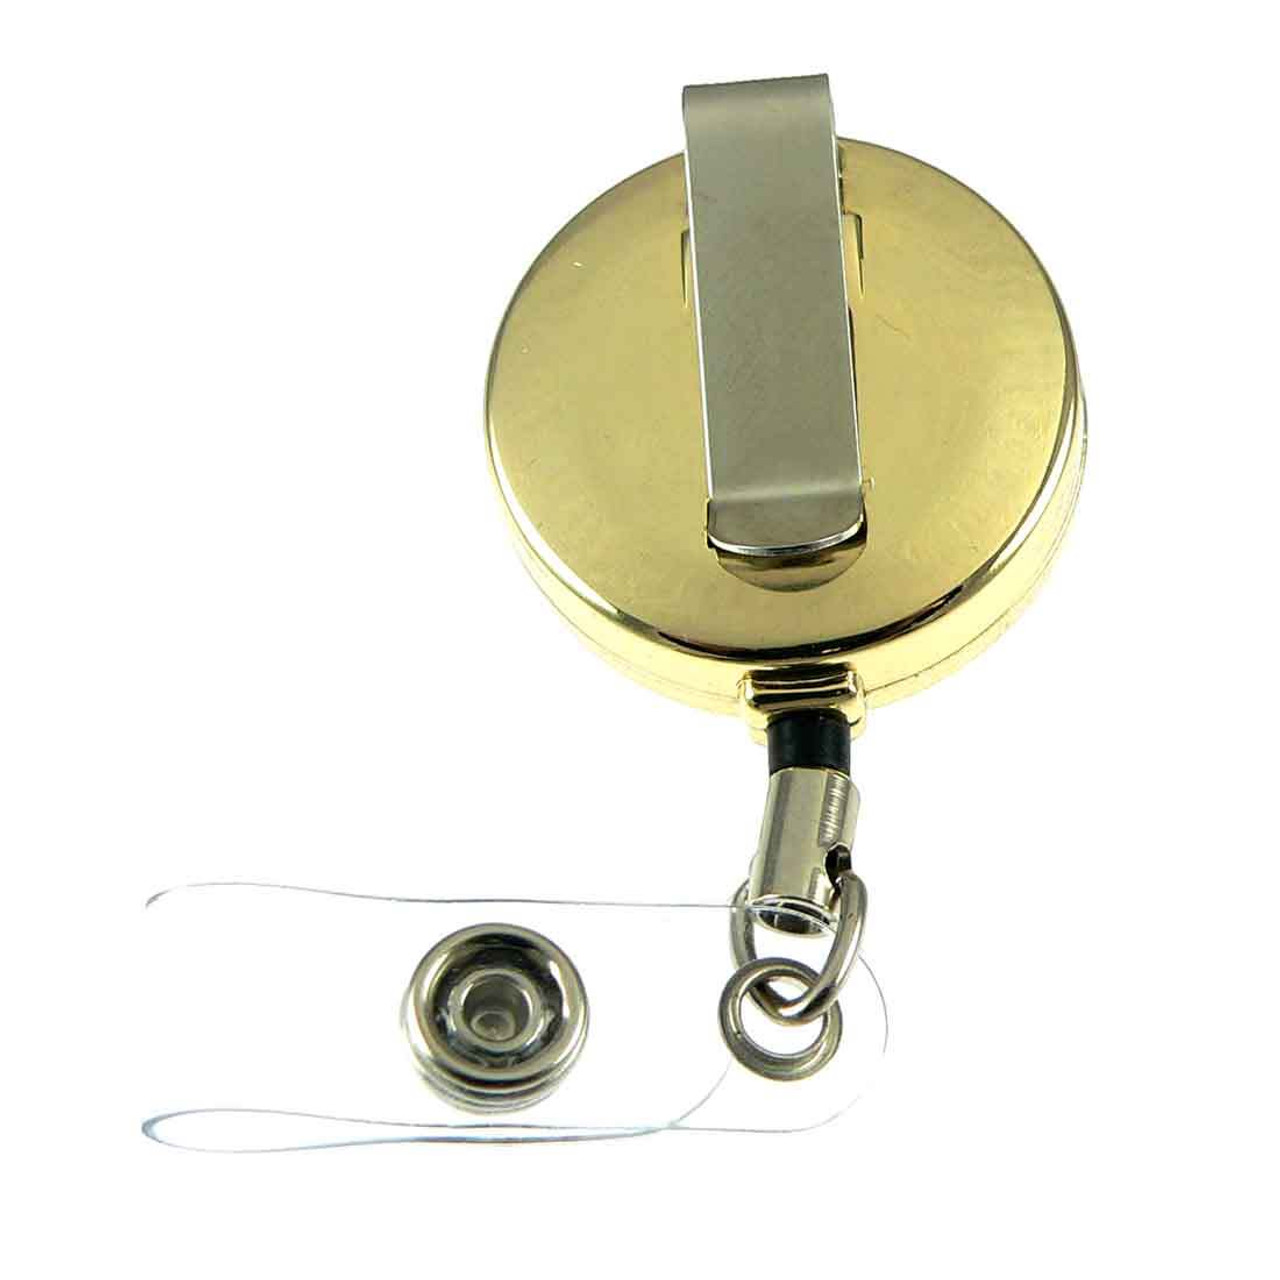 CBP Officer Mini Badge Retractable ID Holder Reel  Customs and Border  Protection Officer Badge Reel